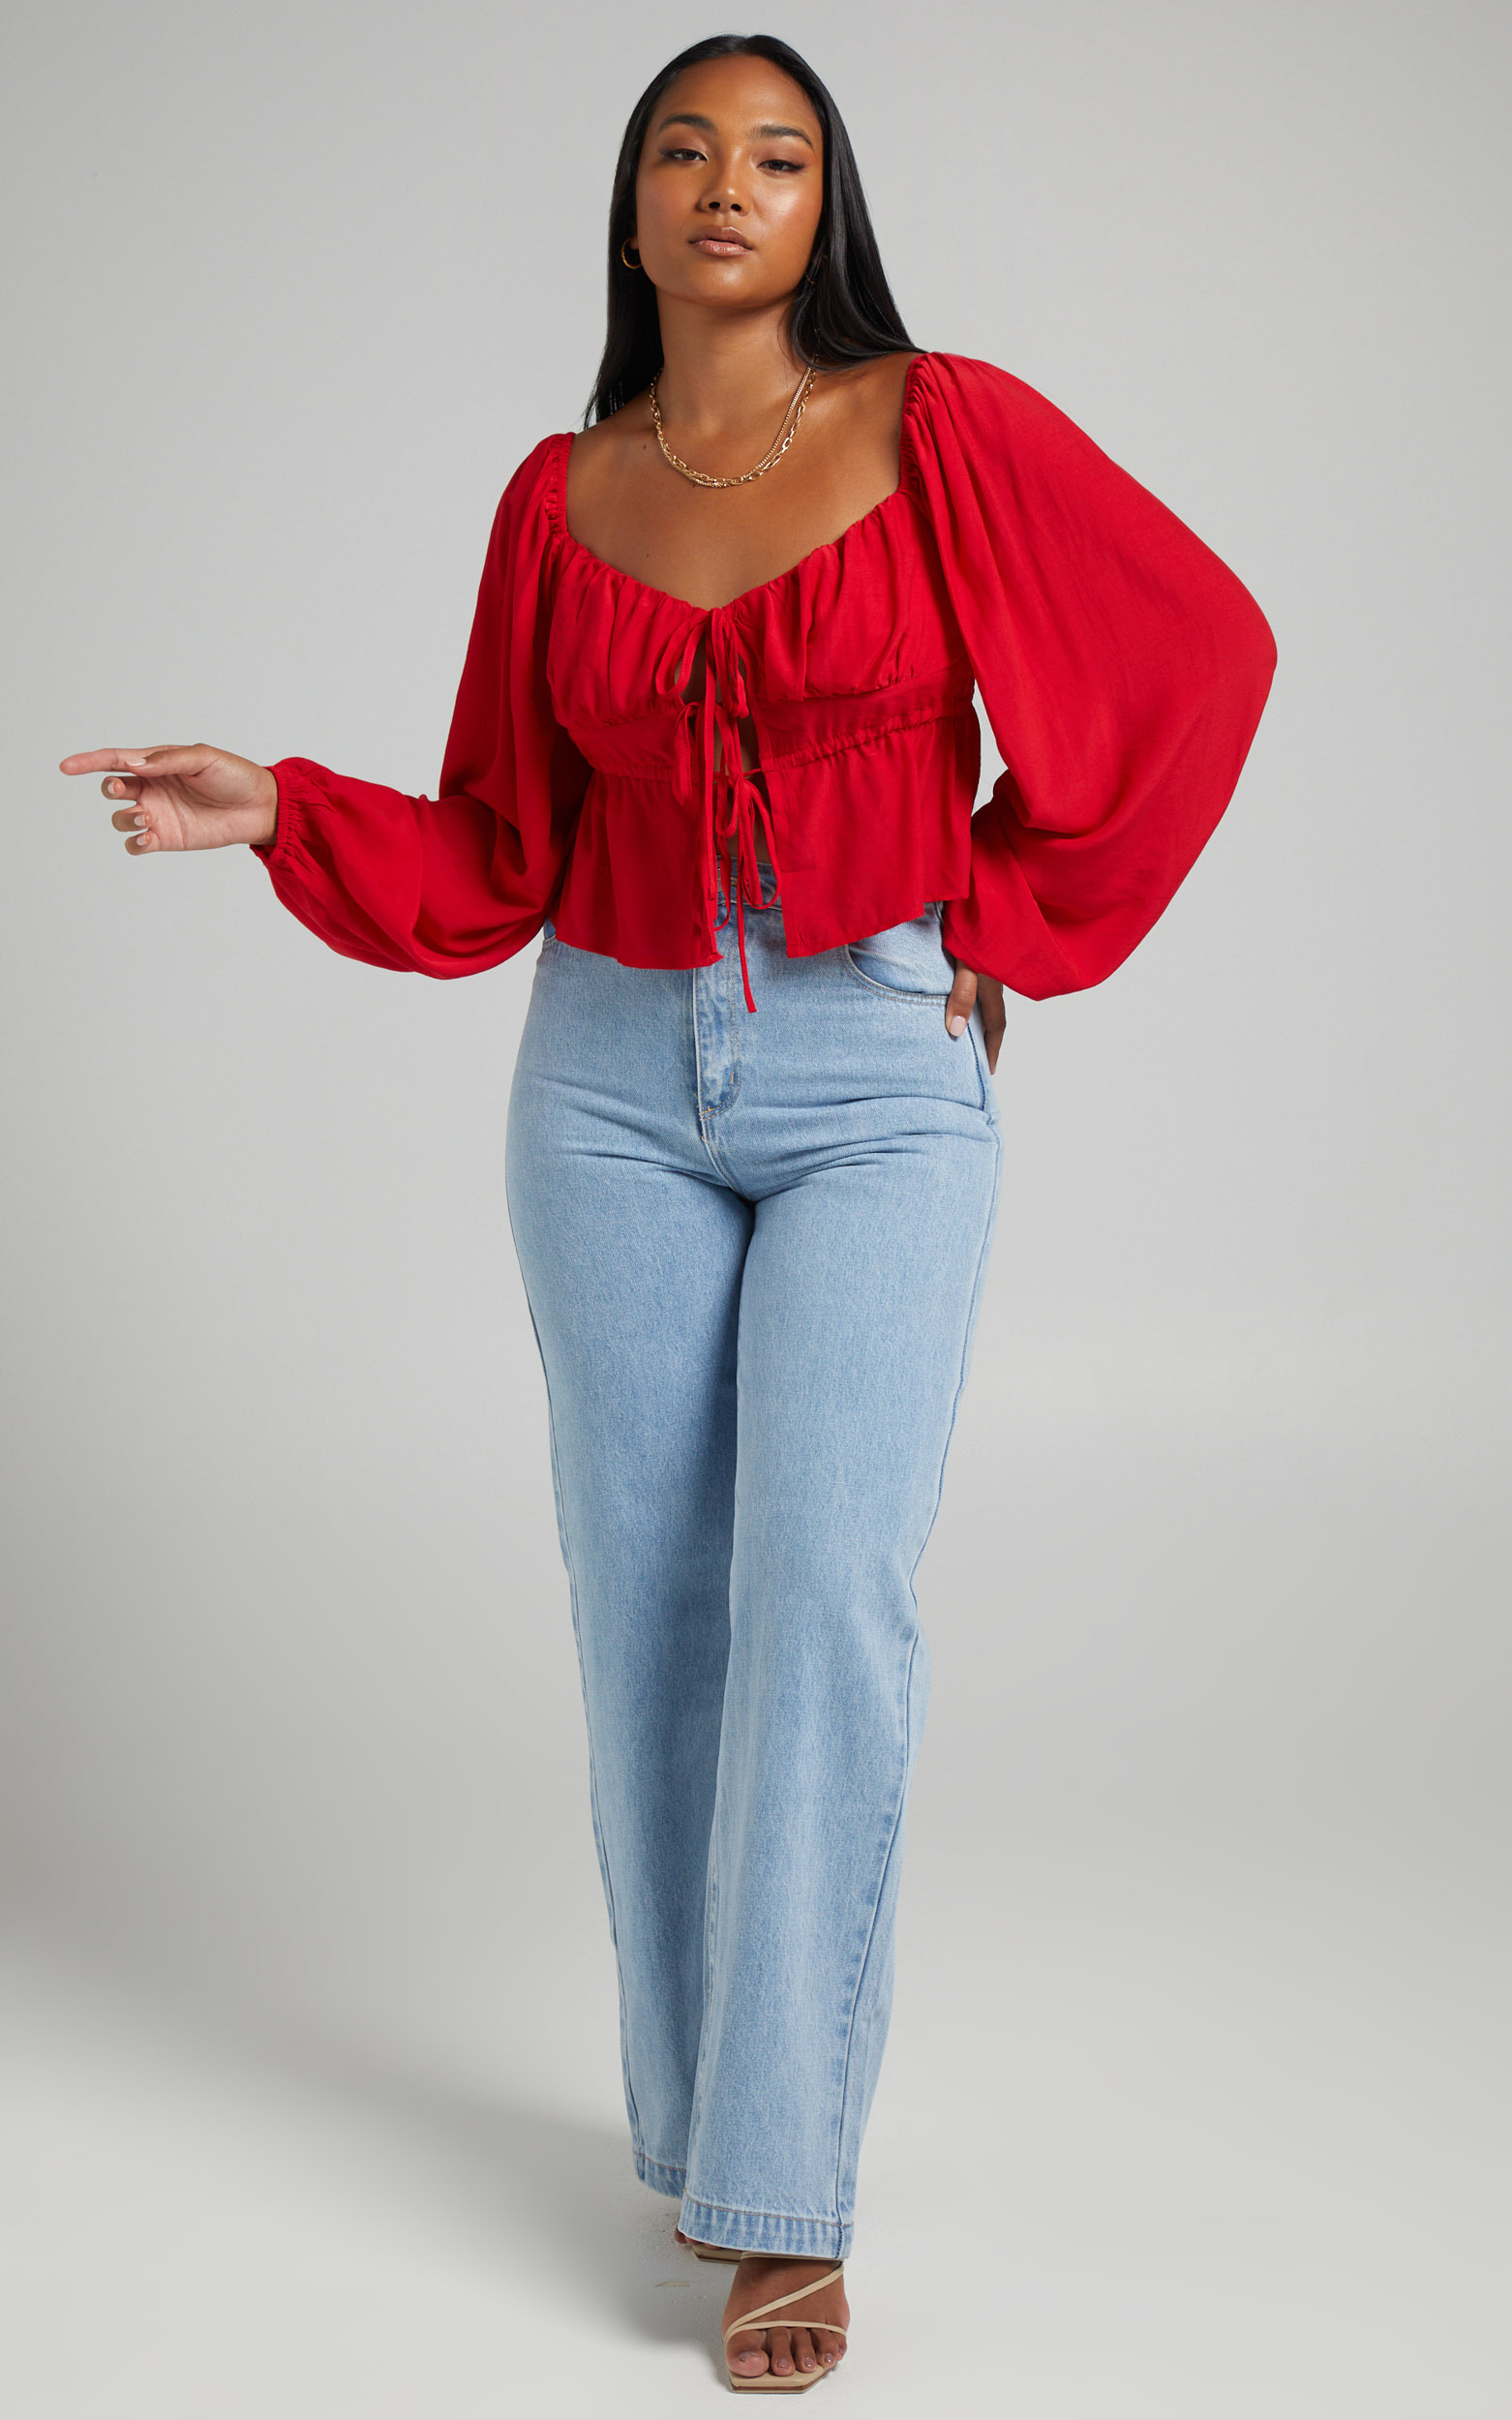 Nadine Long Sleeve Top with Ruched Bust in Red - 06, RED4, hi-res image number null